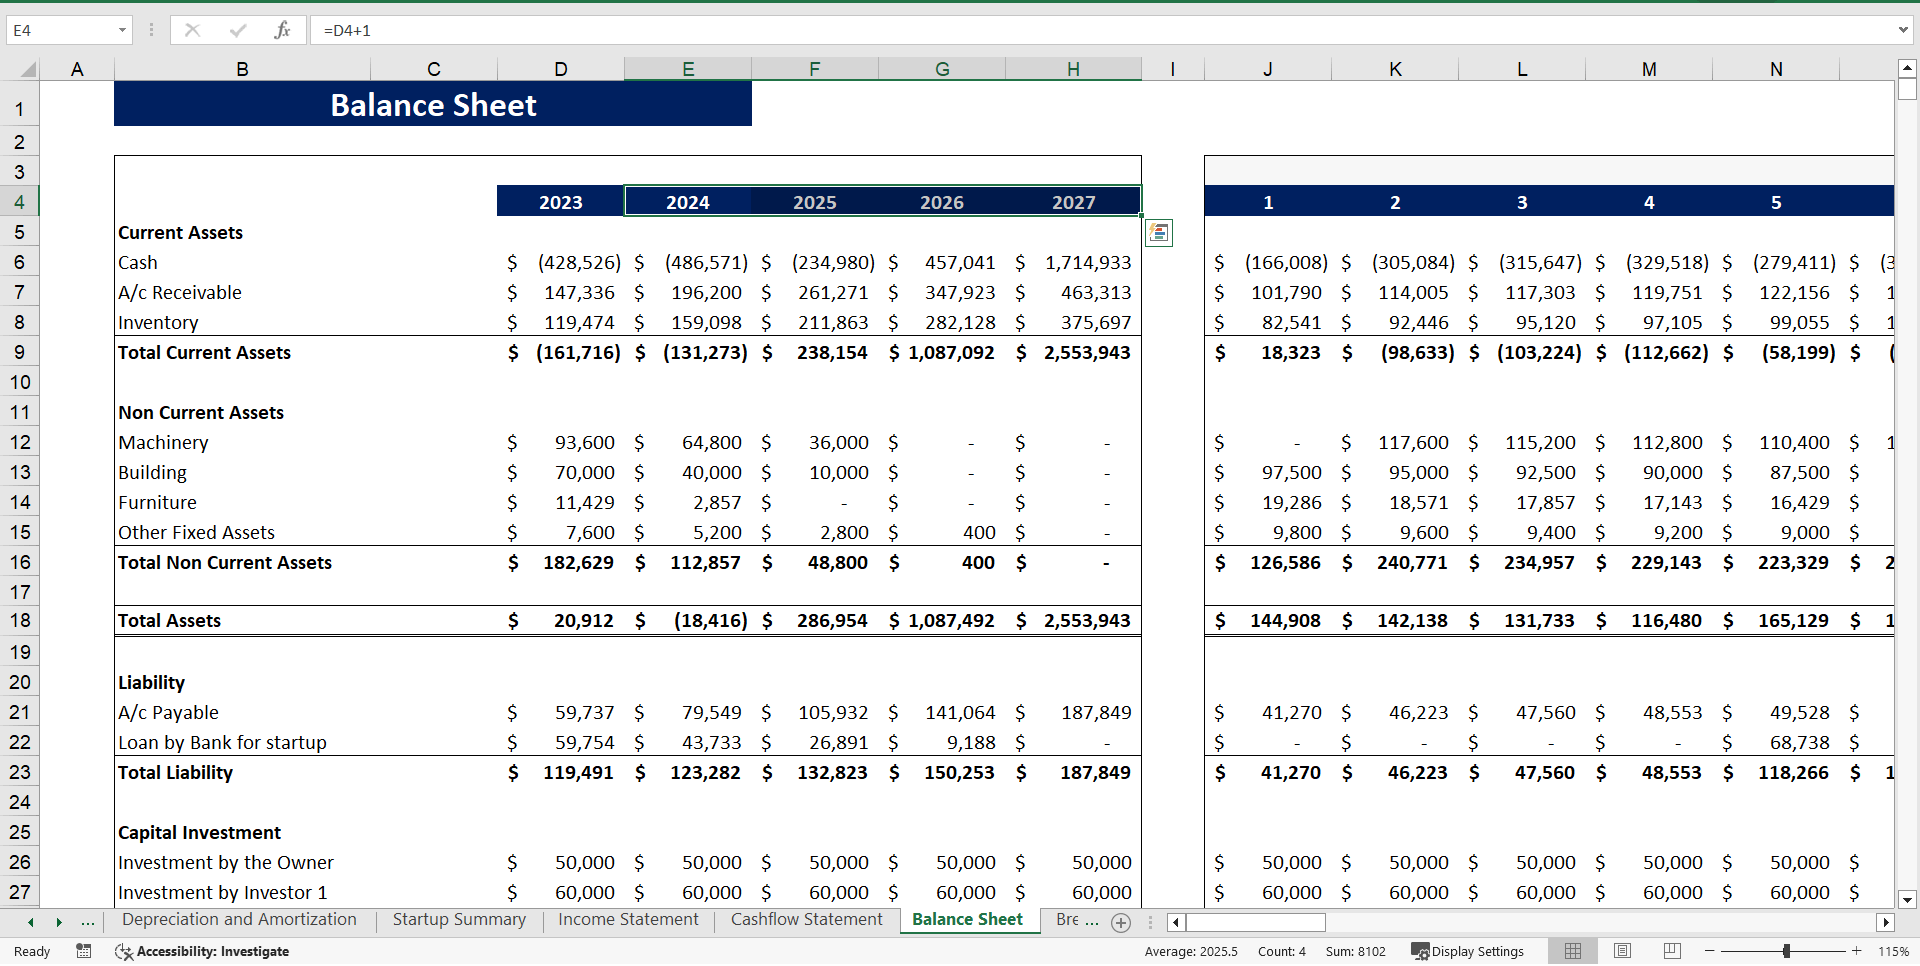 Rental Equipment Excel Financial Model (Excel template (XLSX)) Preview Image